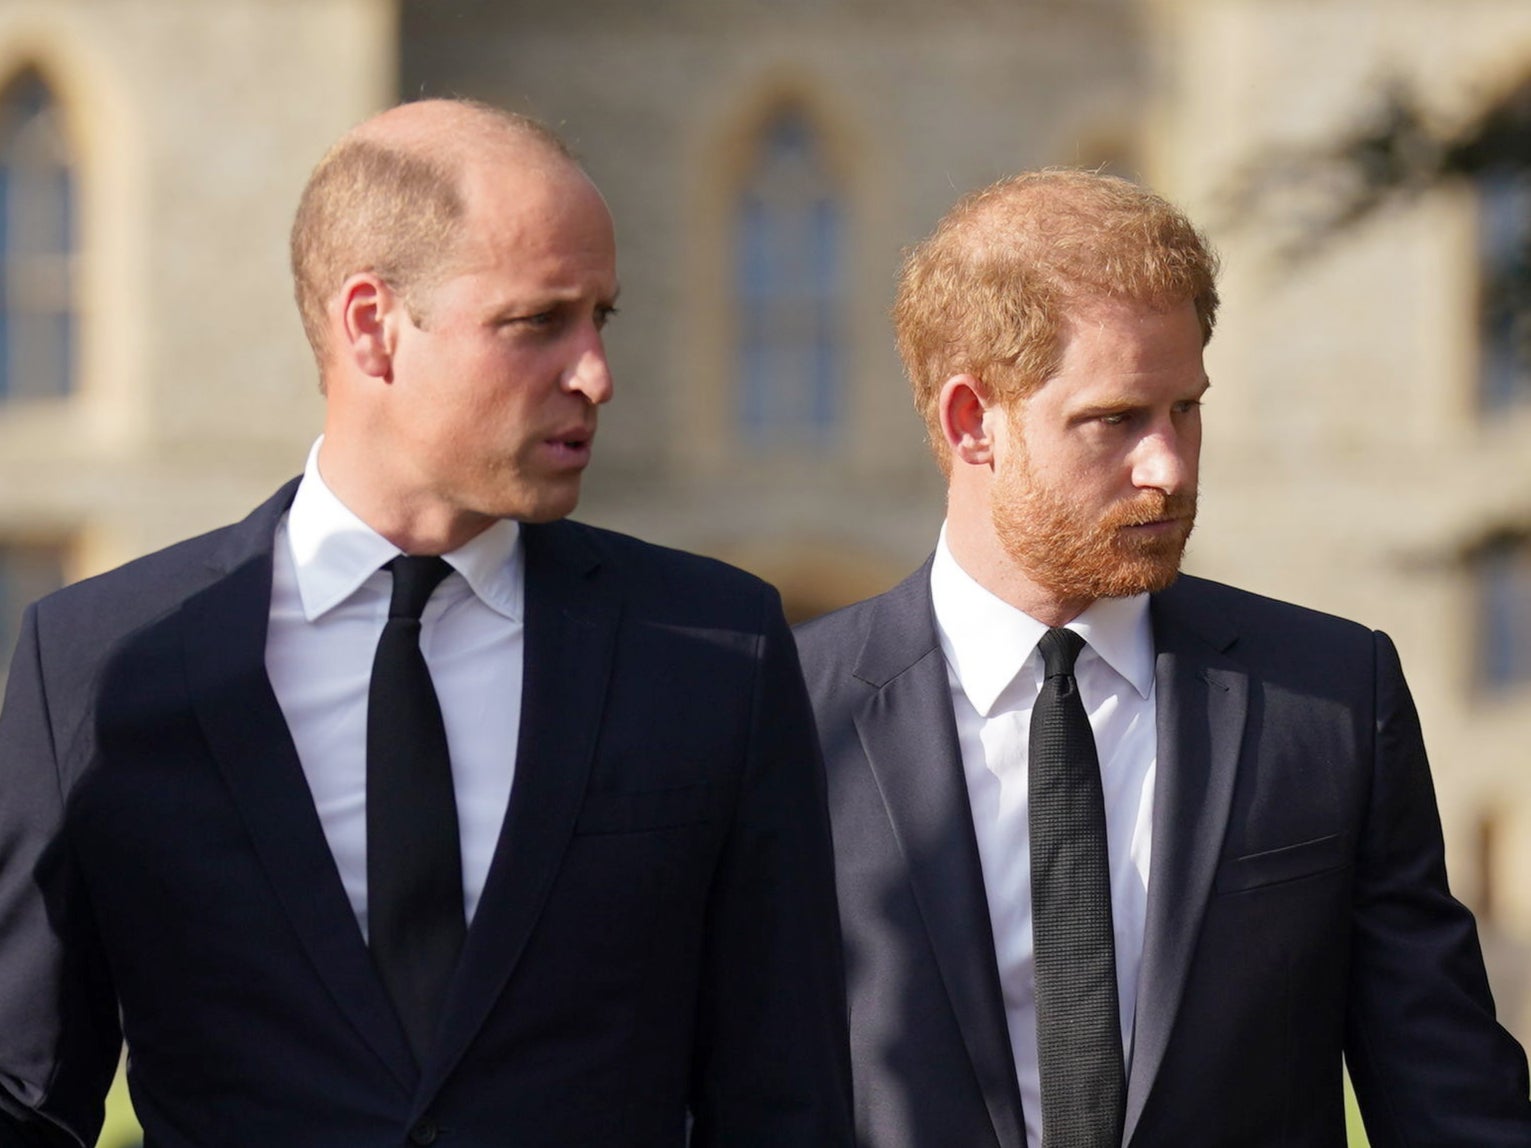 Princes William and Harry at Windsor Castle after the death of their grandmother